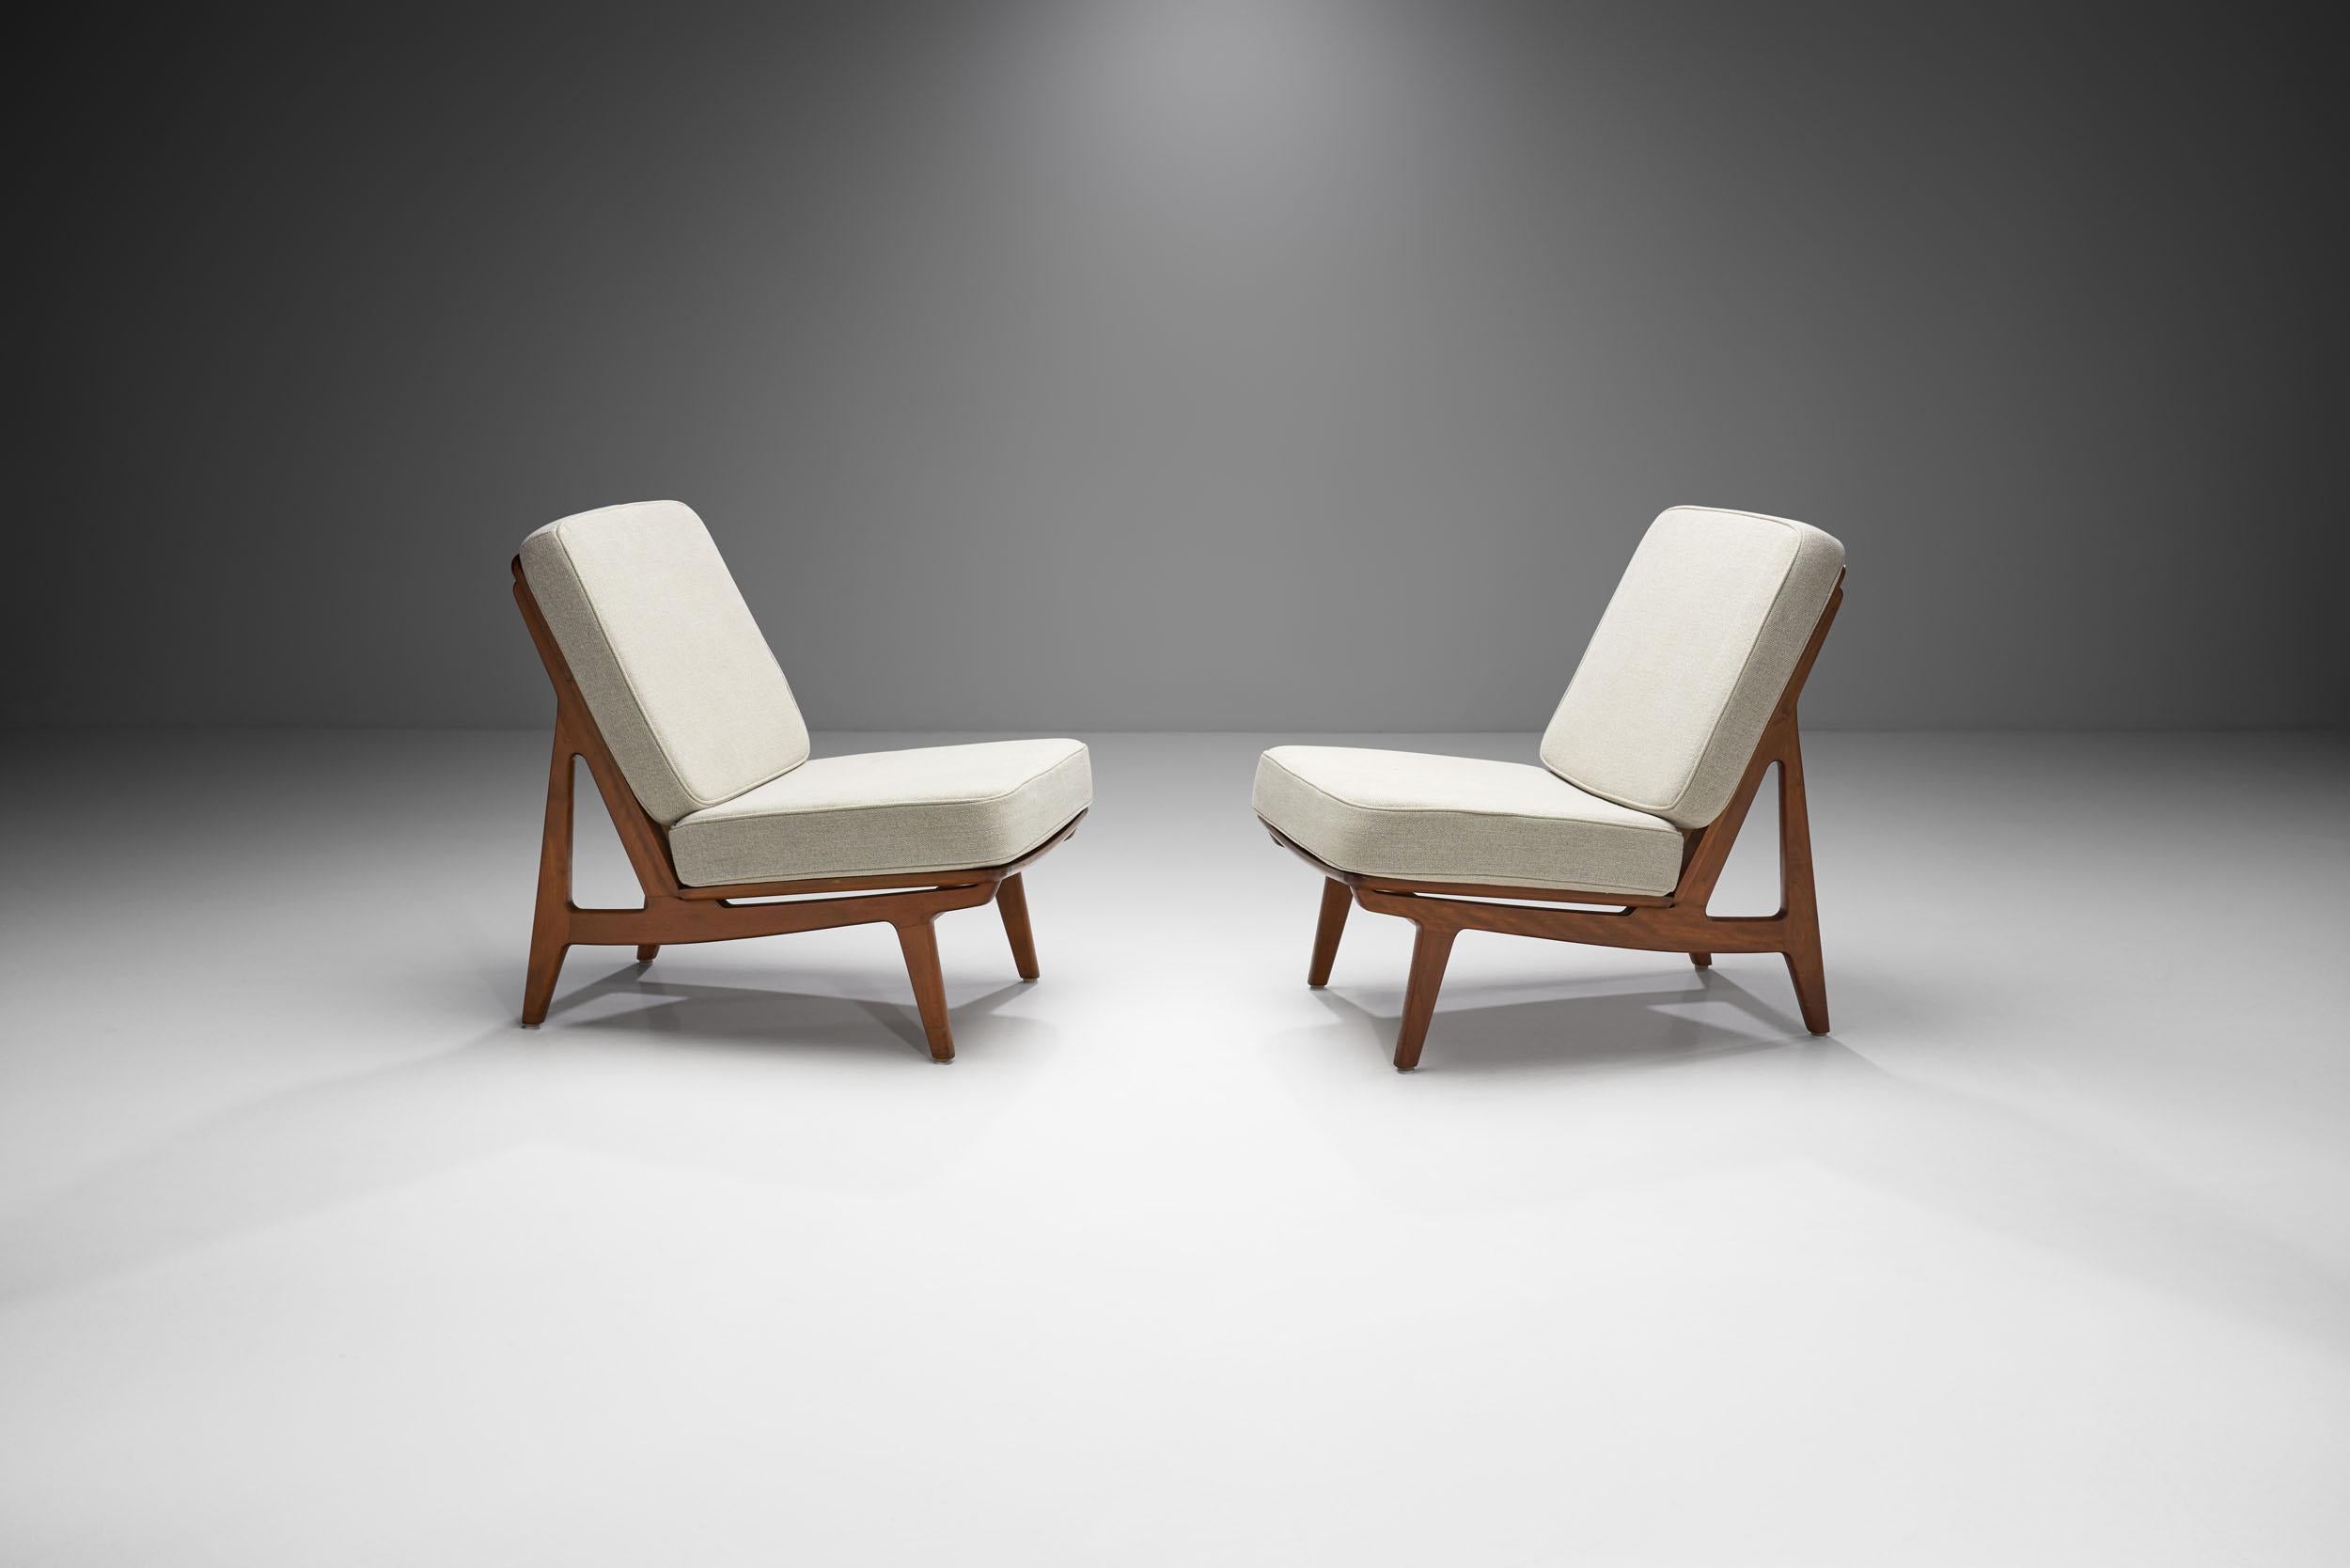 Danish Pair of FD 172 Slipper Chairs by Peter Hvidt and Orla Mølgaard, Denmark, 1960s